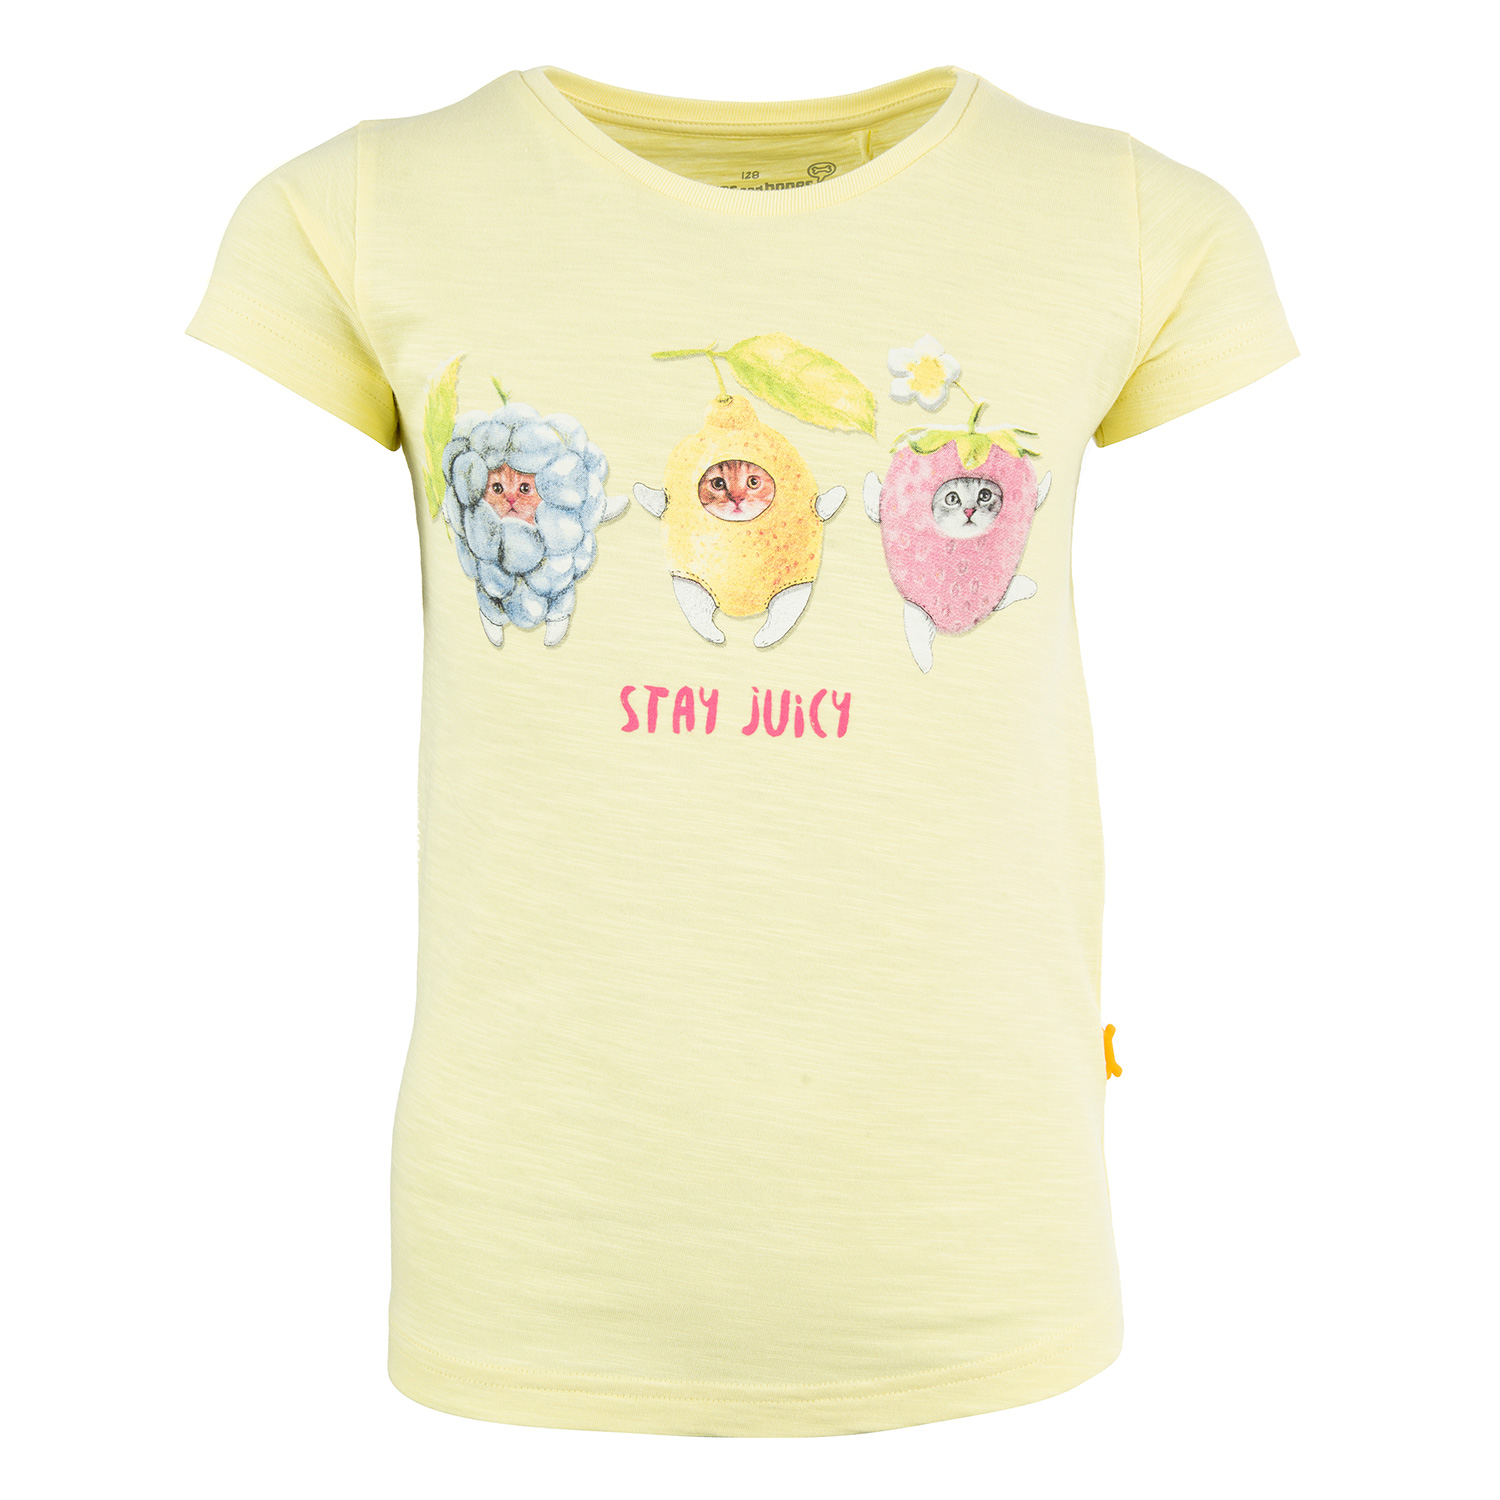 Camille - STAY JUICY s. yellow